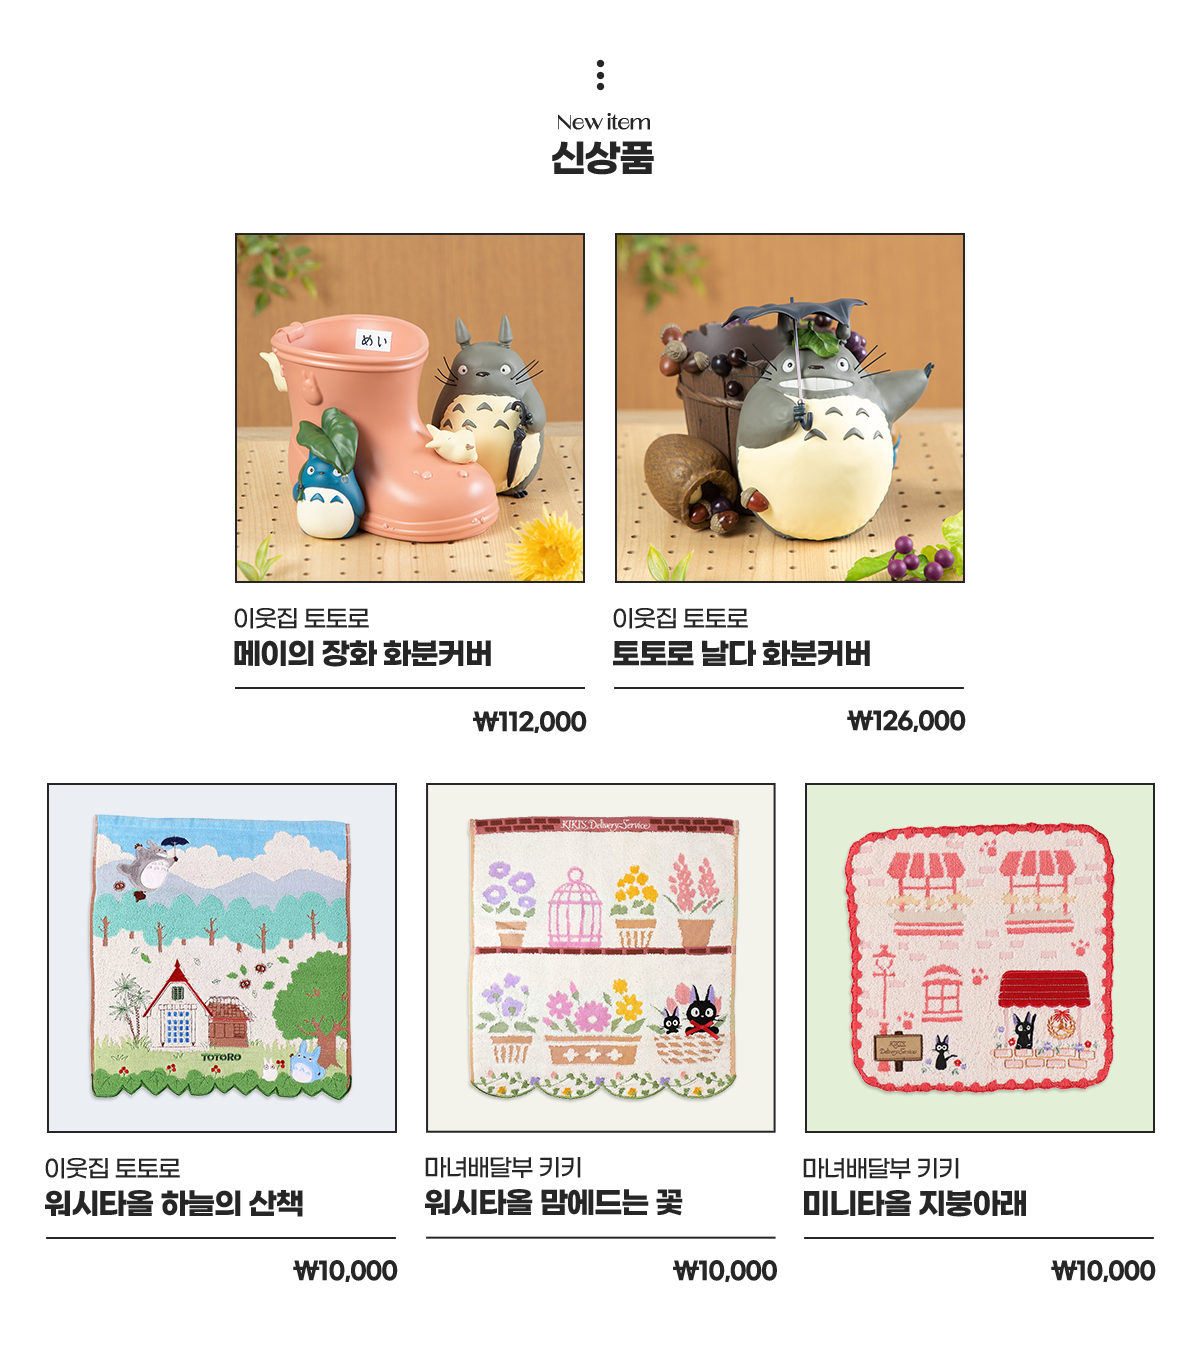 ALL ABOUT GHIBLI ITEM